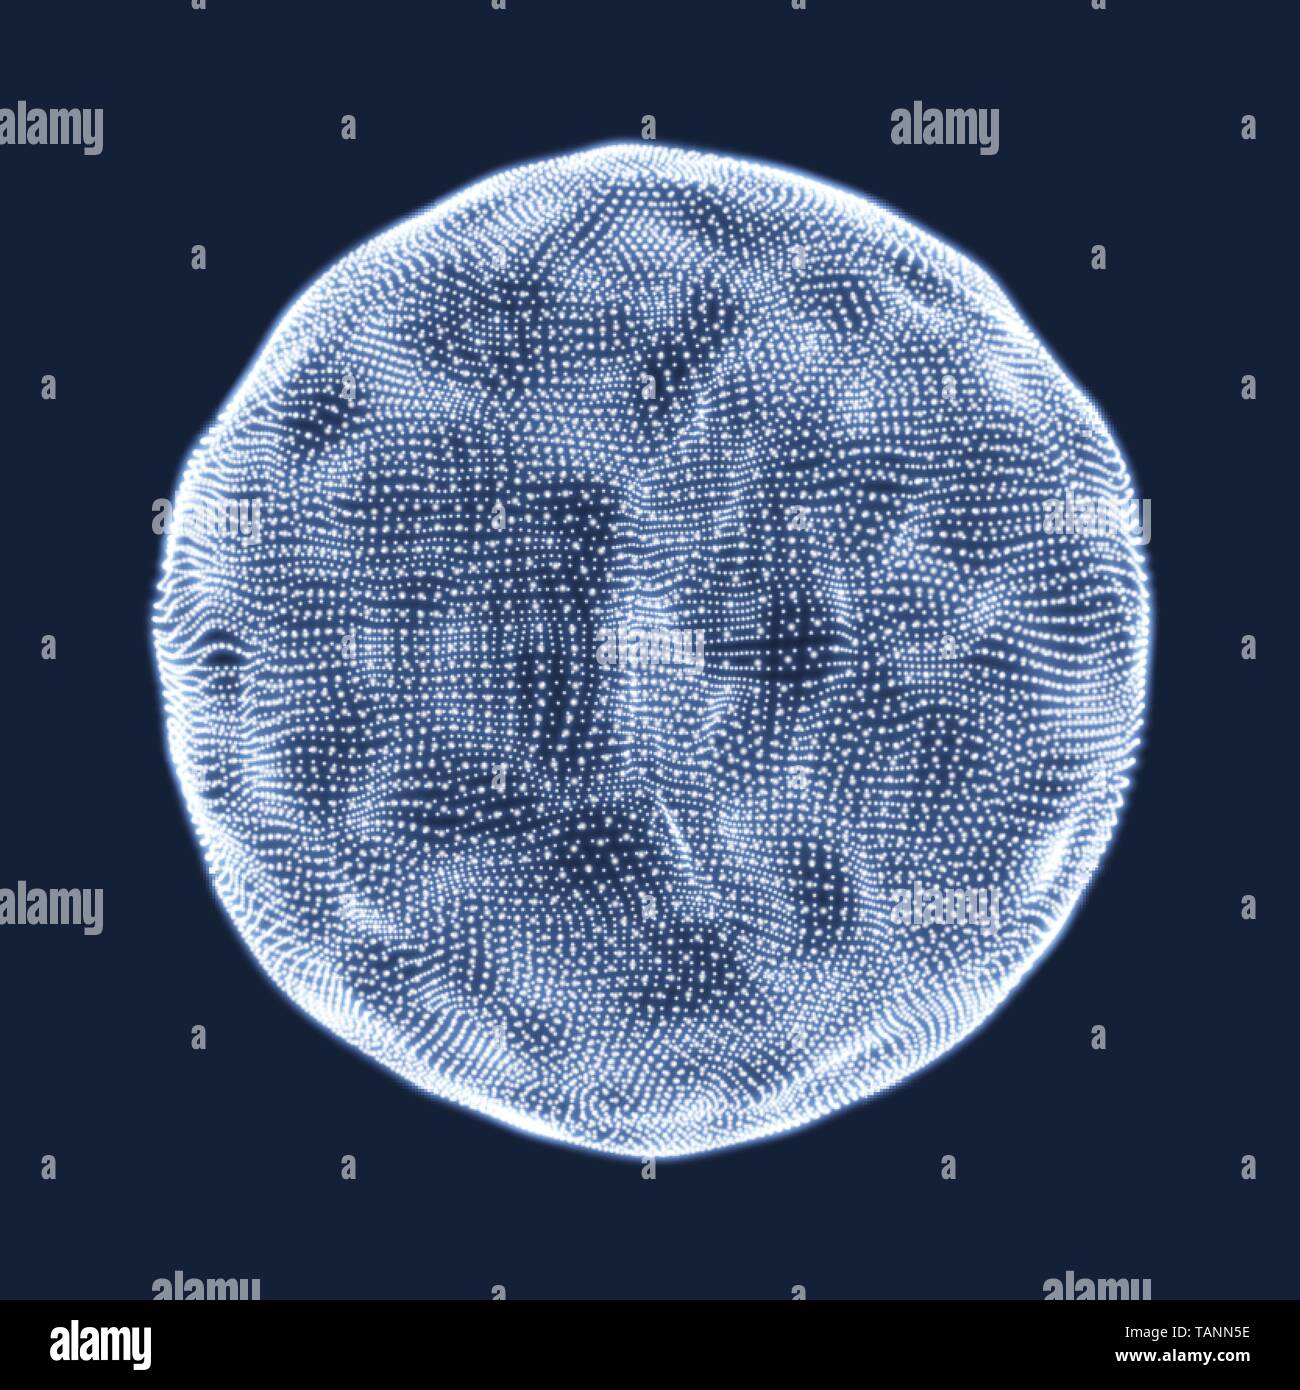 The Sphere Consisting of Points. Abstract Globe Grid. Sphere Illustration. 3D Grid Design. Technology Concept. Vector Illustration. Stock Vector